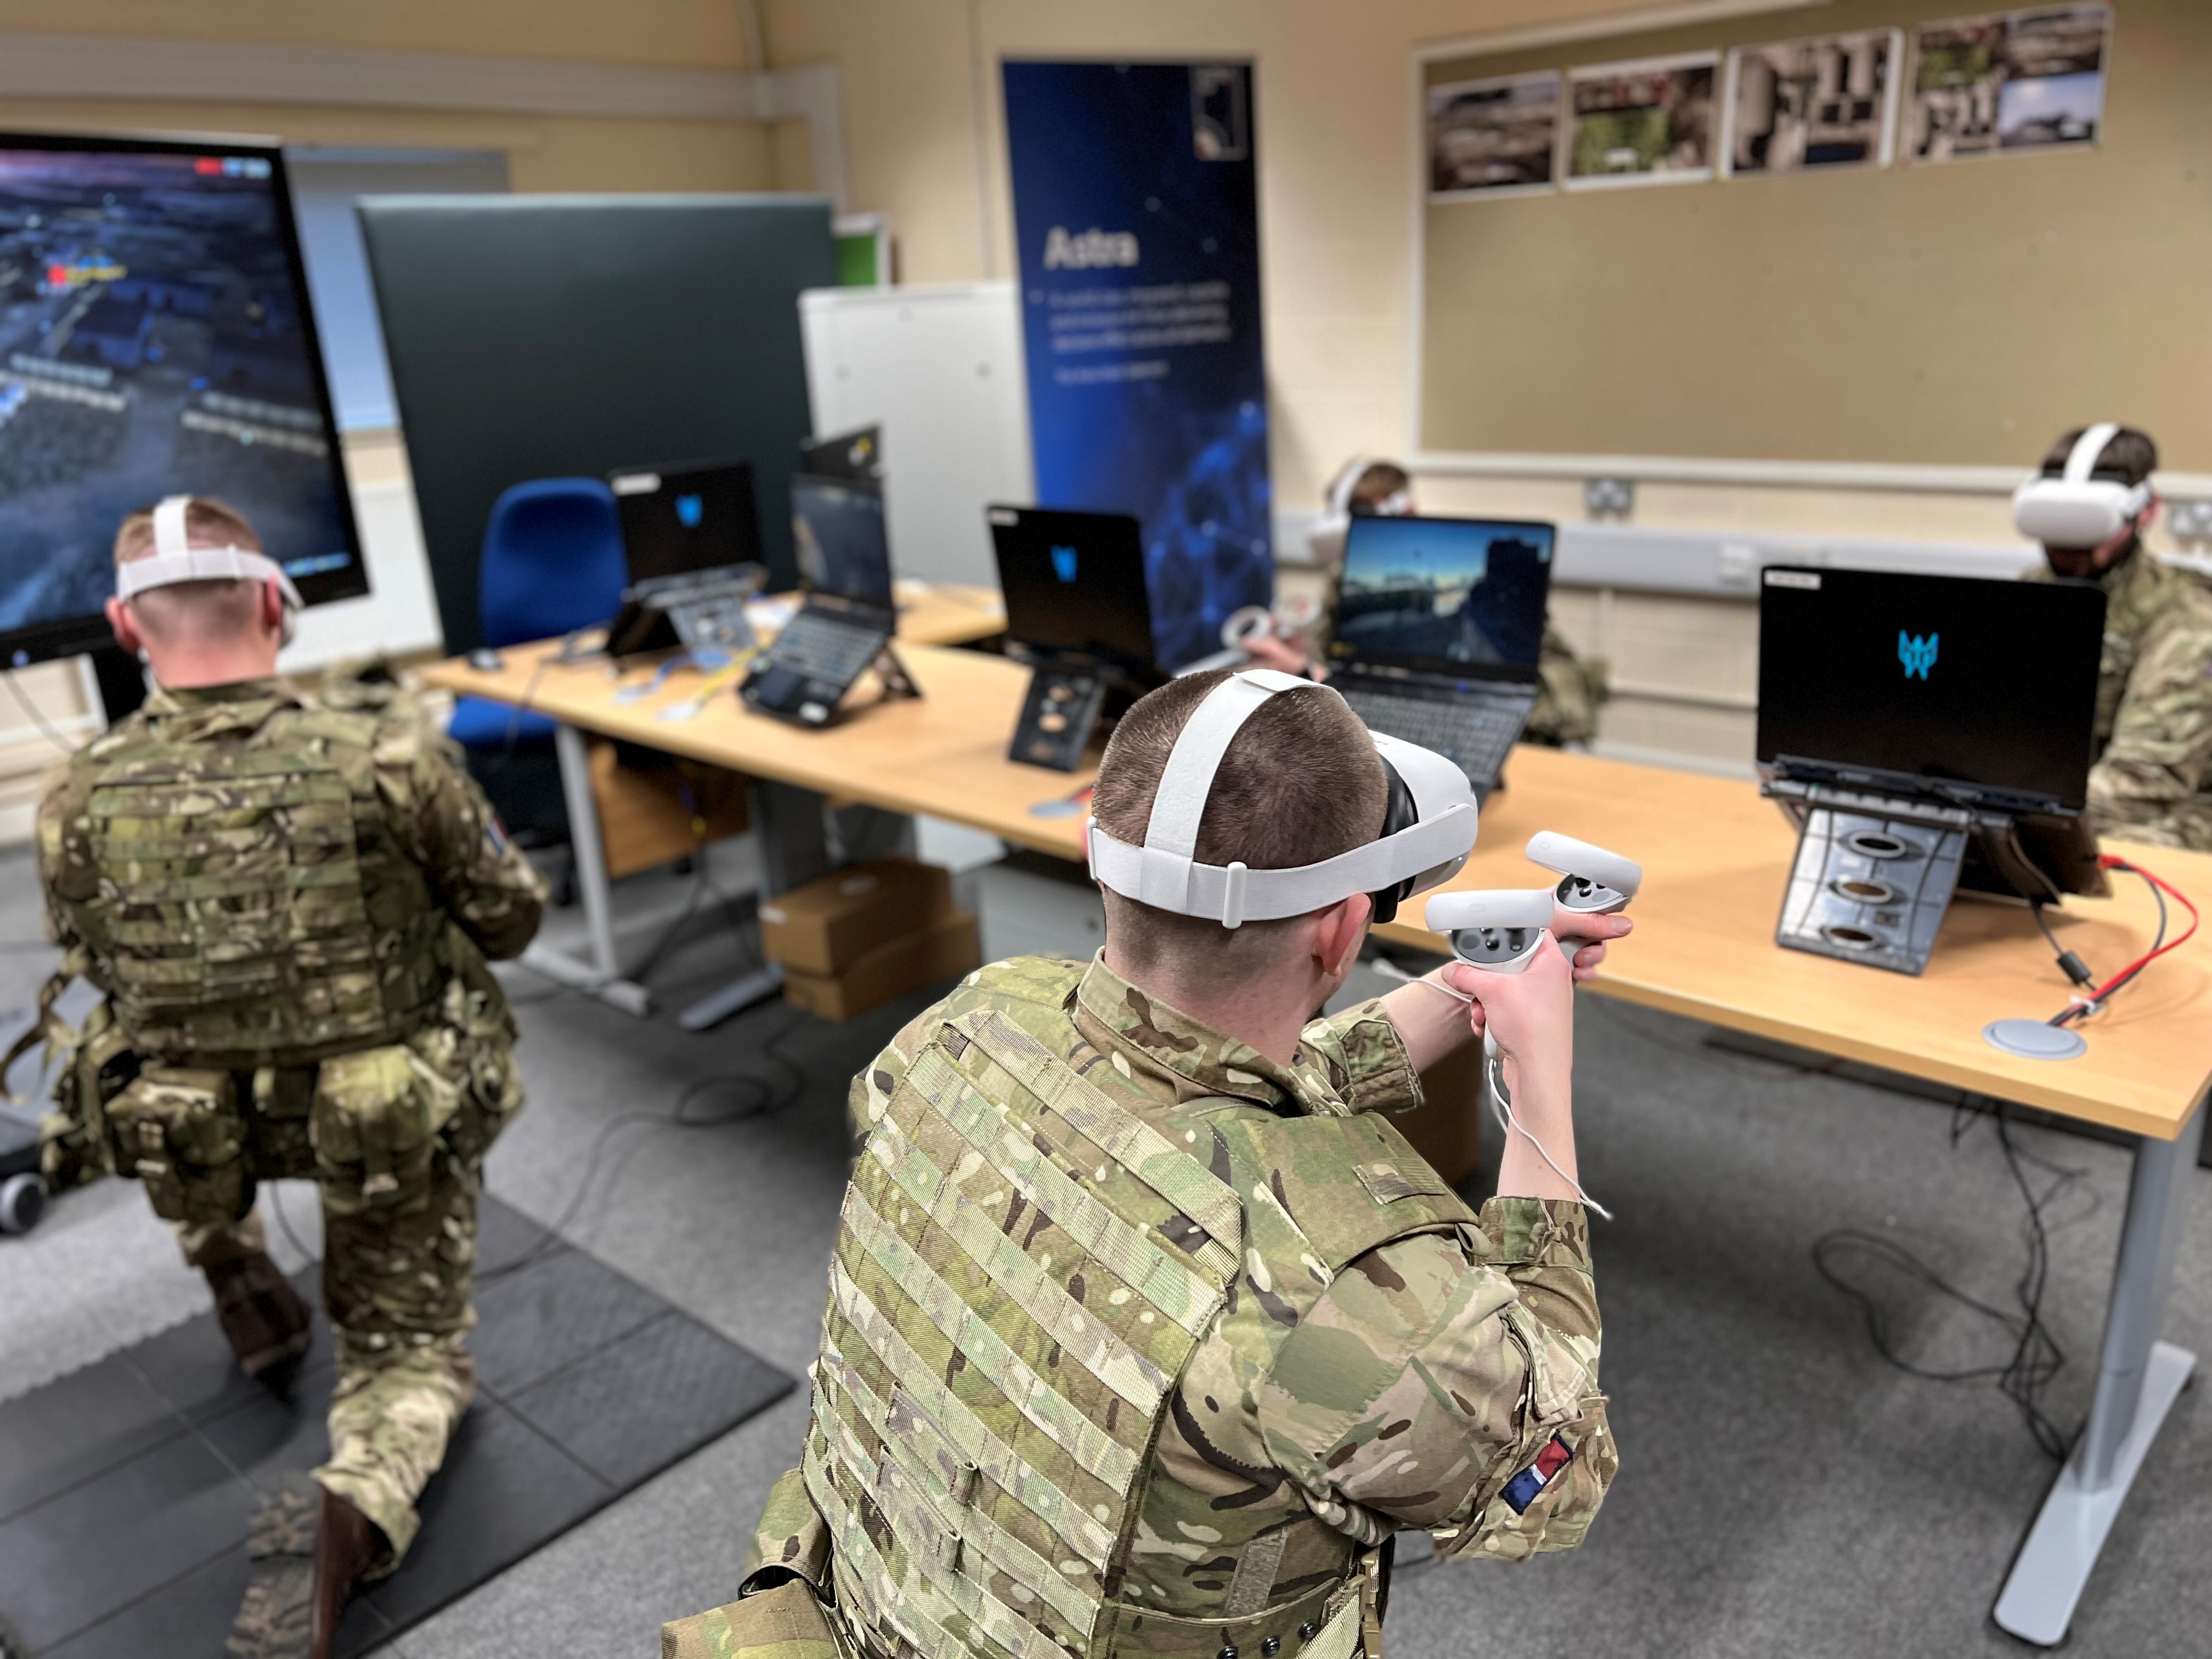 Personnel wear Virtual Reality headsets and use equipment. With computers and desk in background.